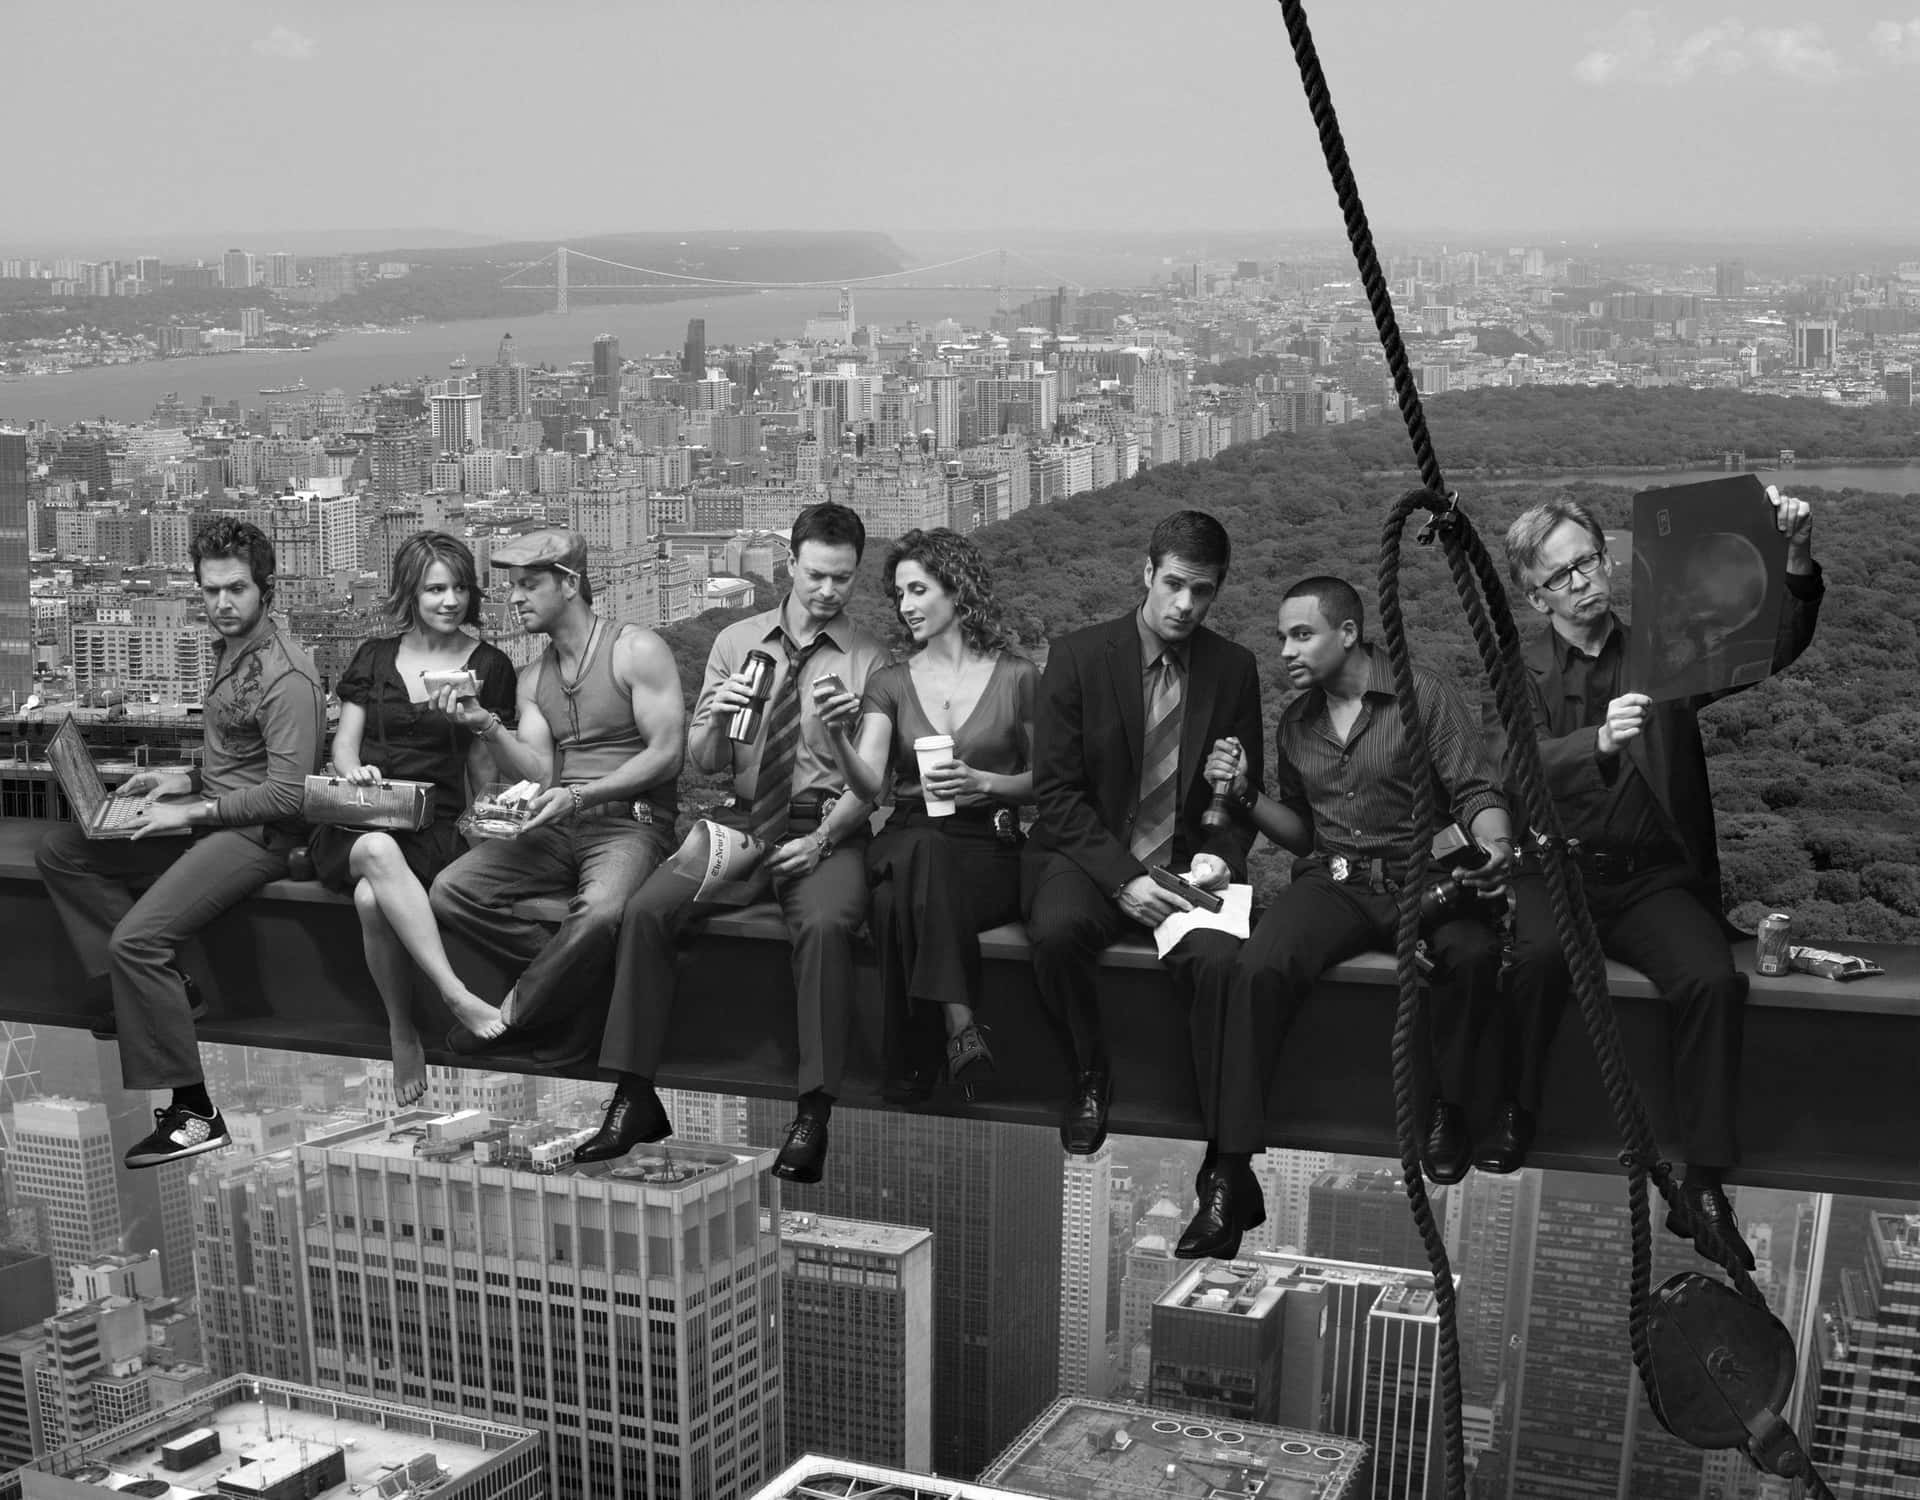 A Group Of People Sitting On A Ledge Overlooking The City Wallpaper